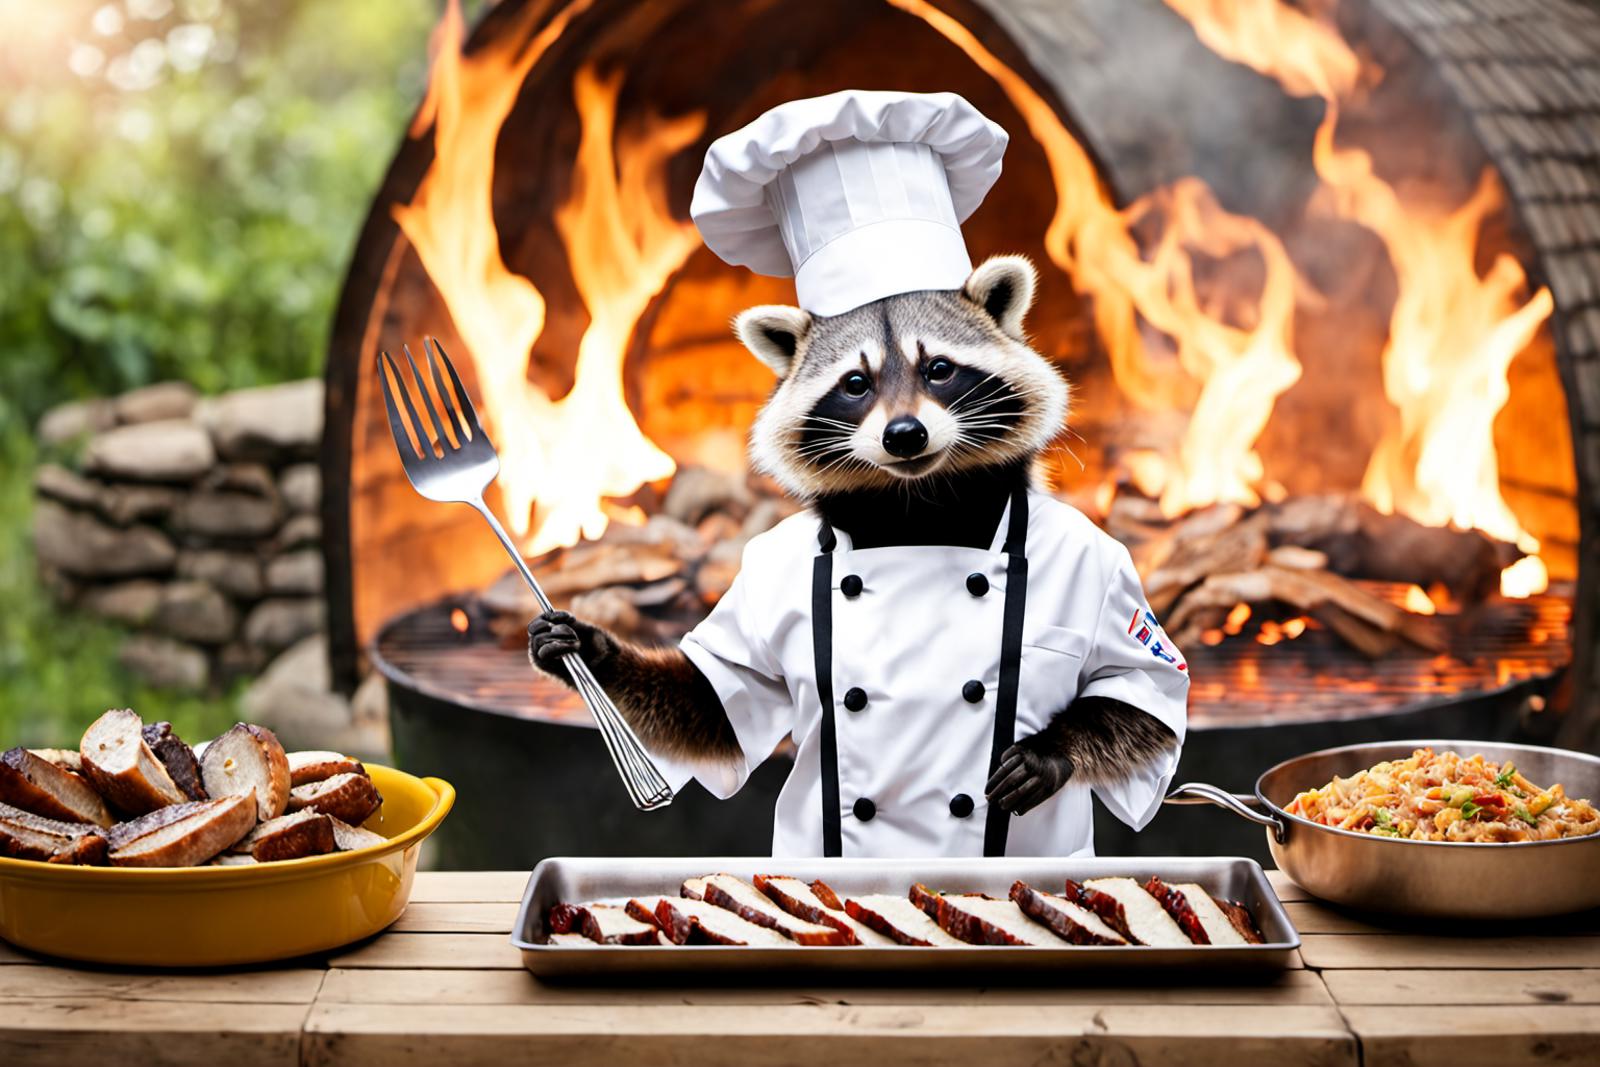 A Raccoon in a Chef's Outfit Cooking Sausages on a Grill